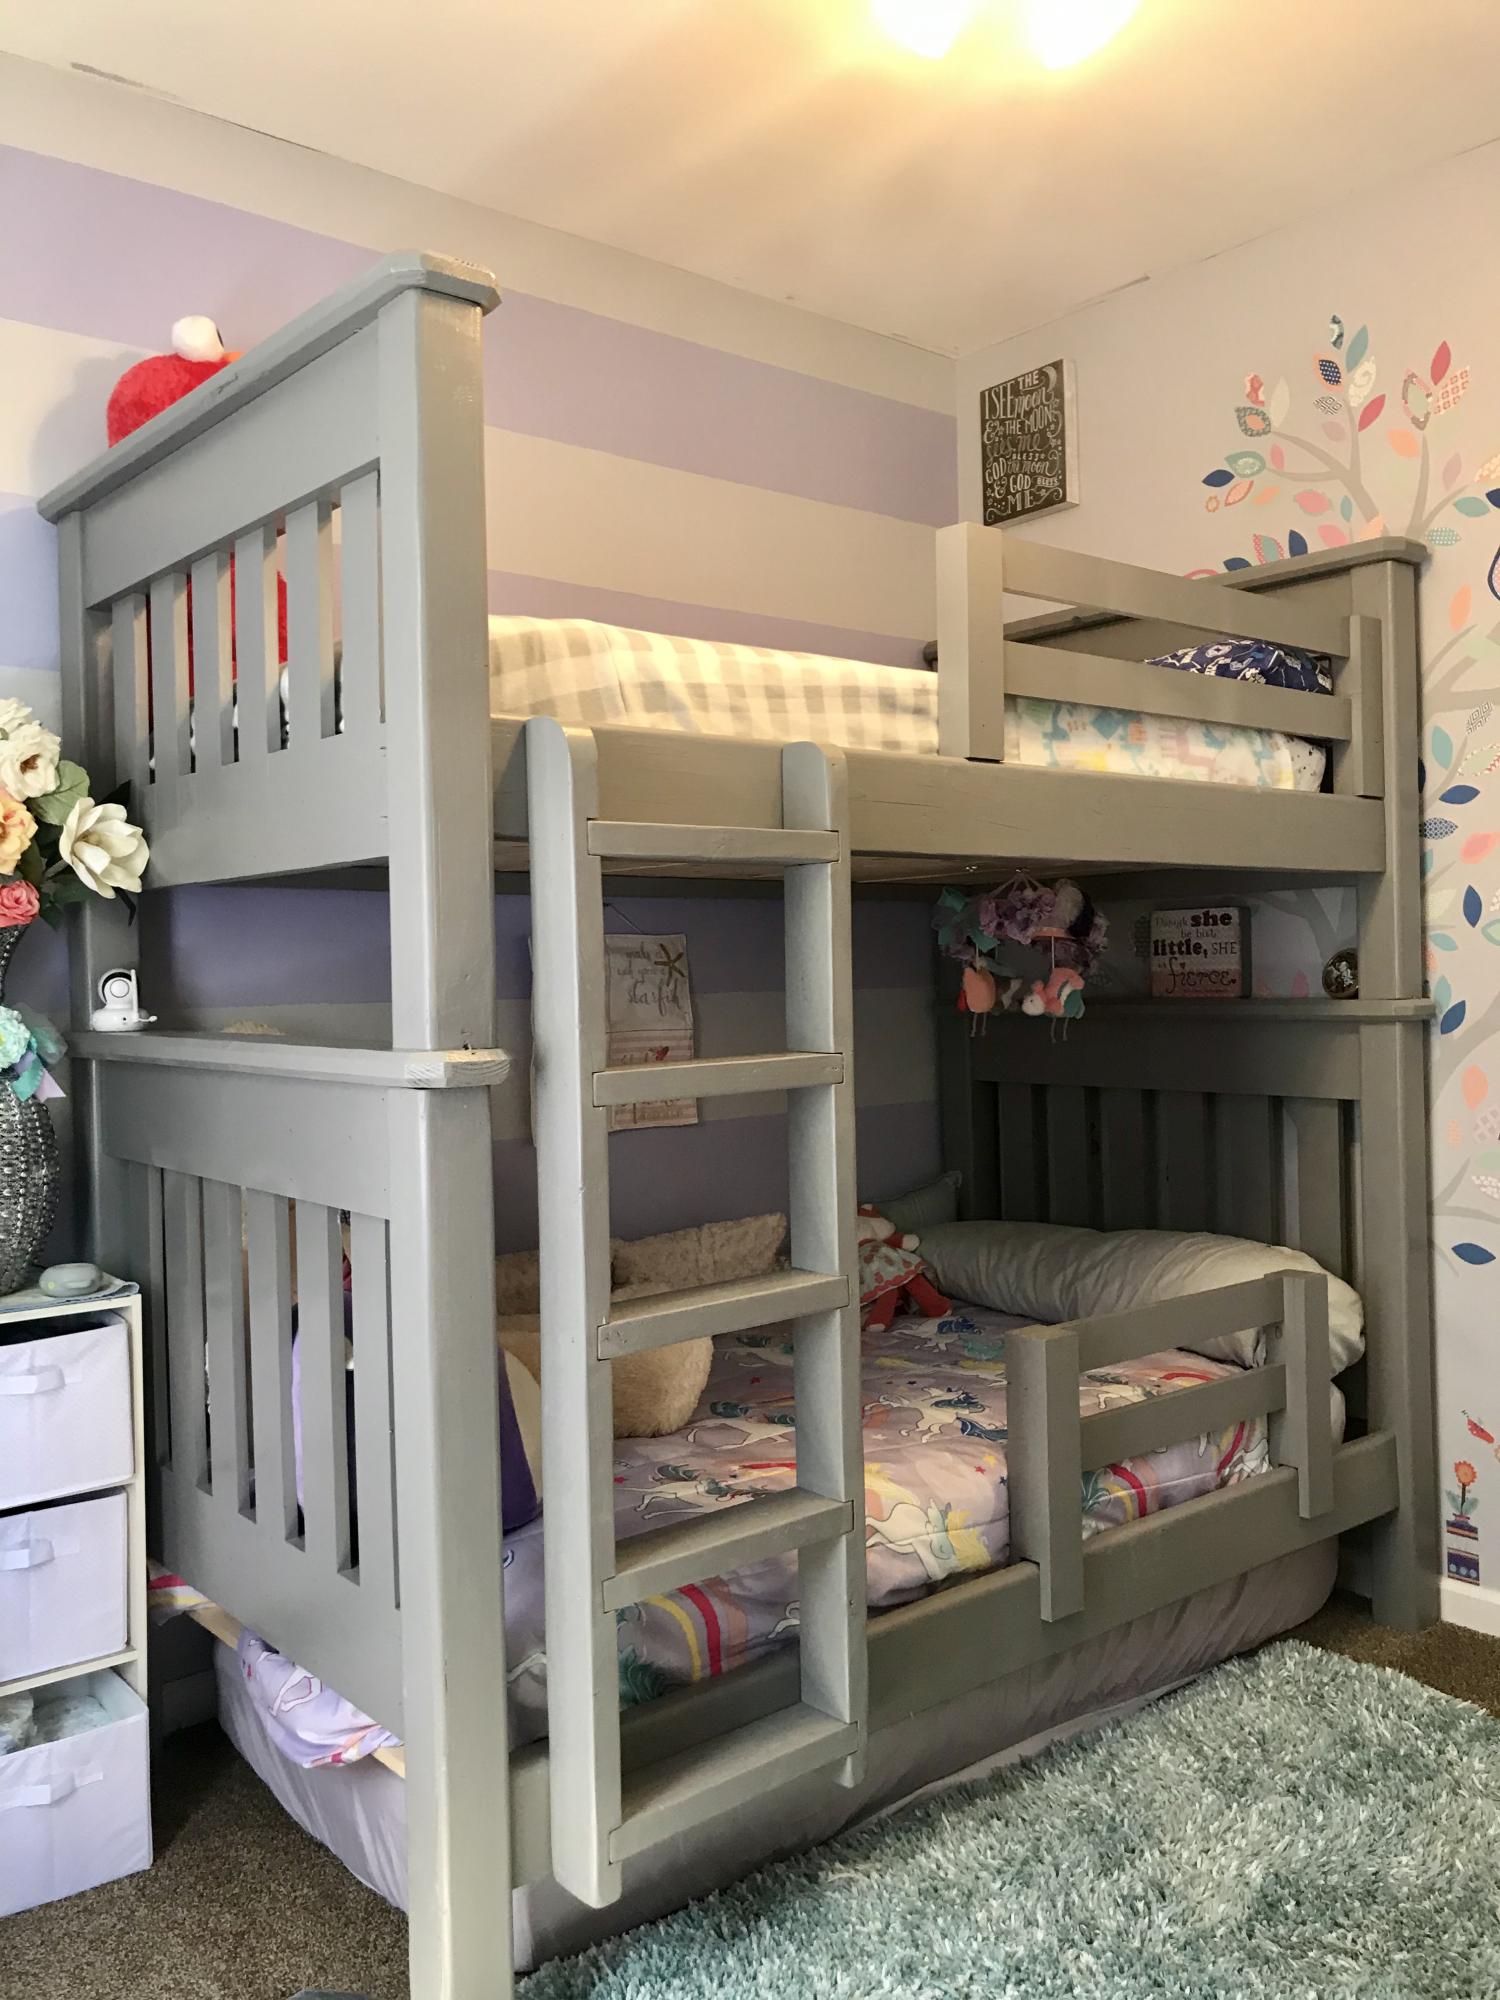 Simple Bunk Bed Ana White, Bunk Beds With Bottom Safety Rail